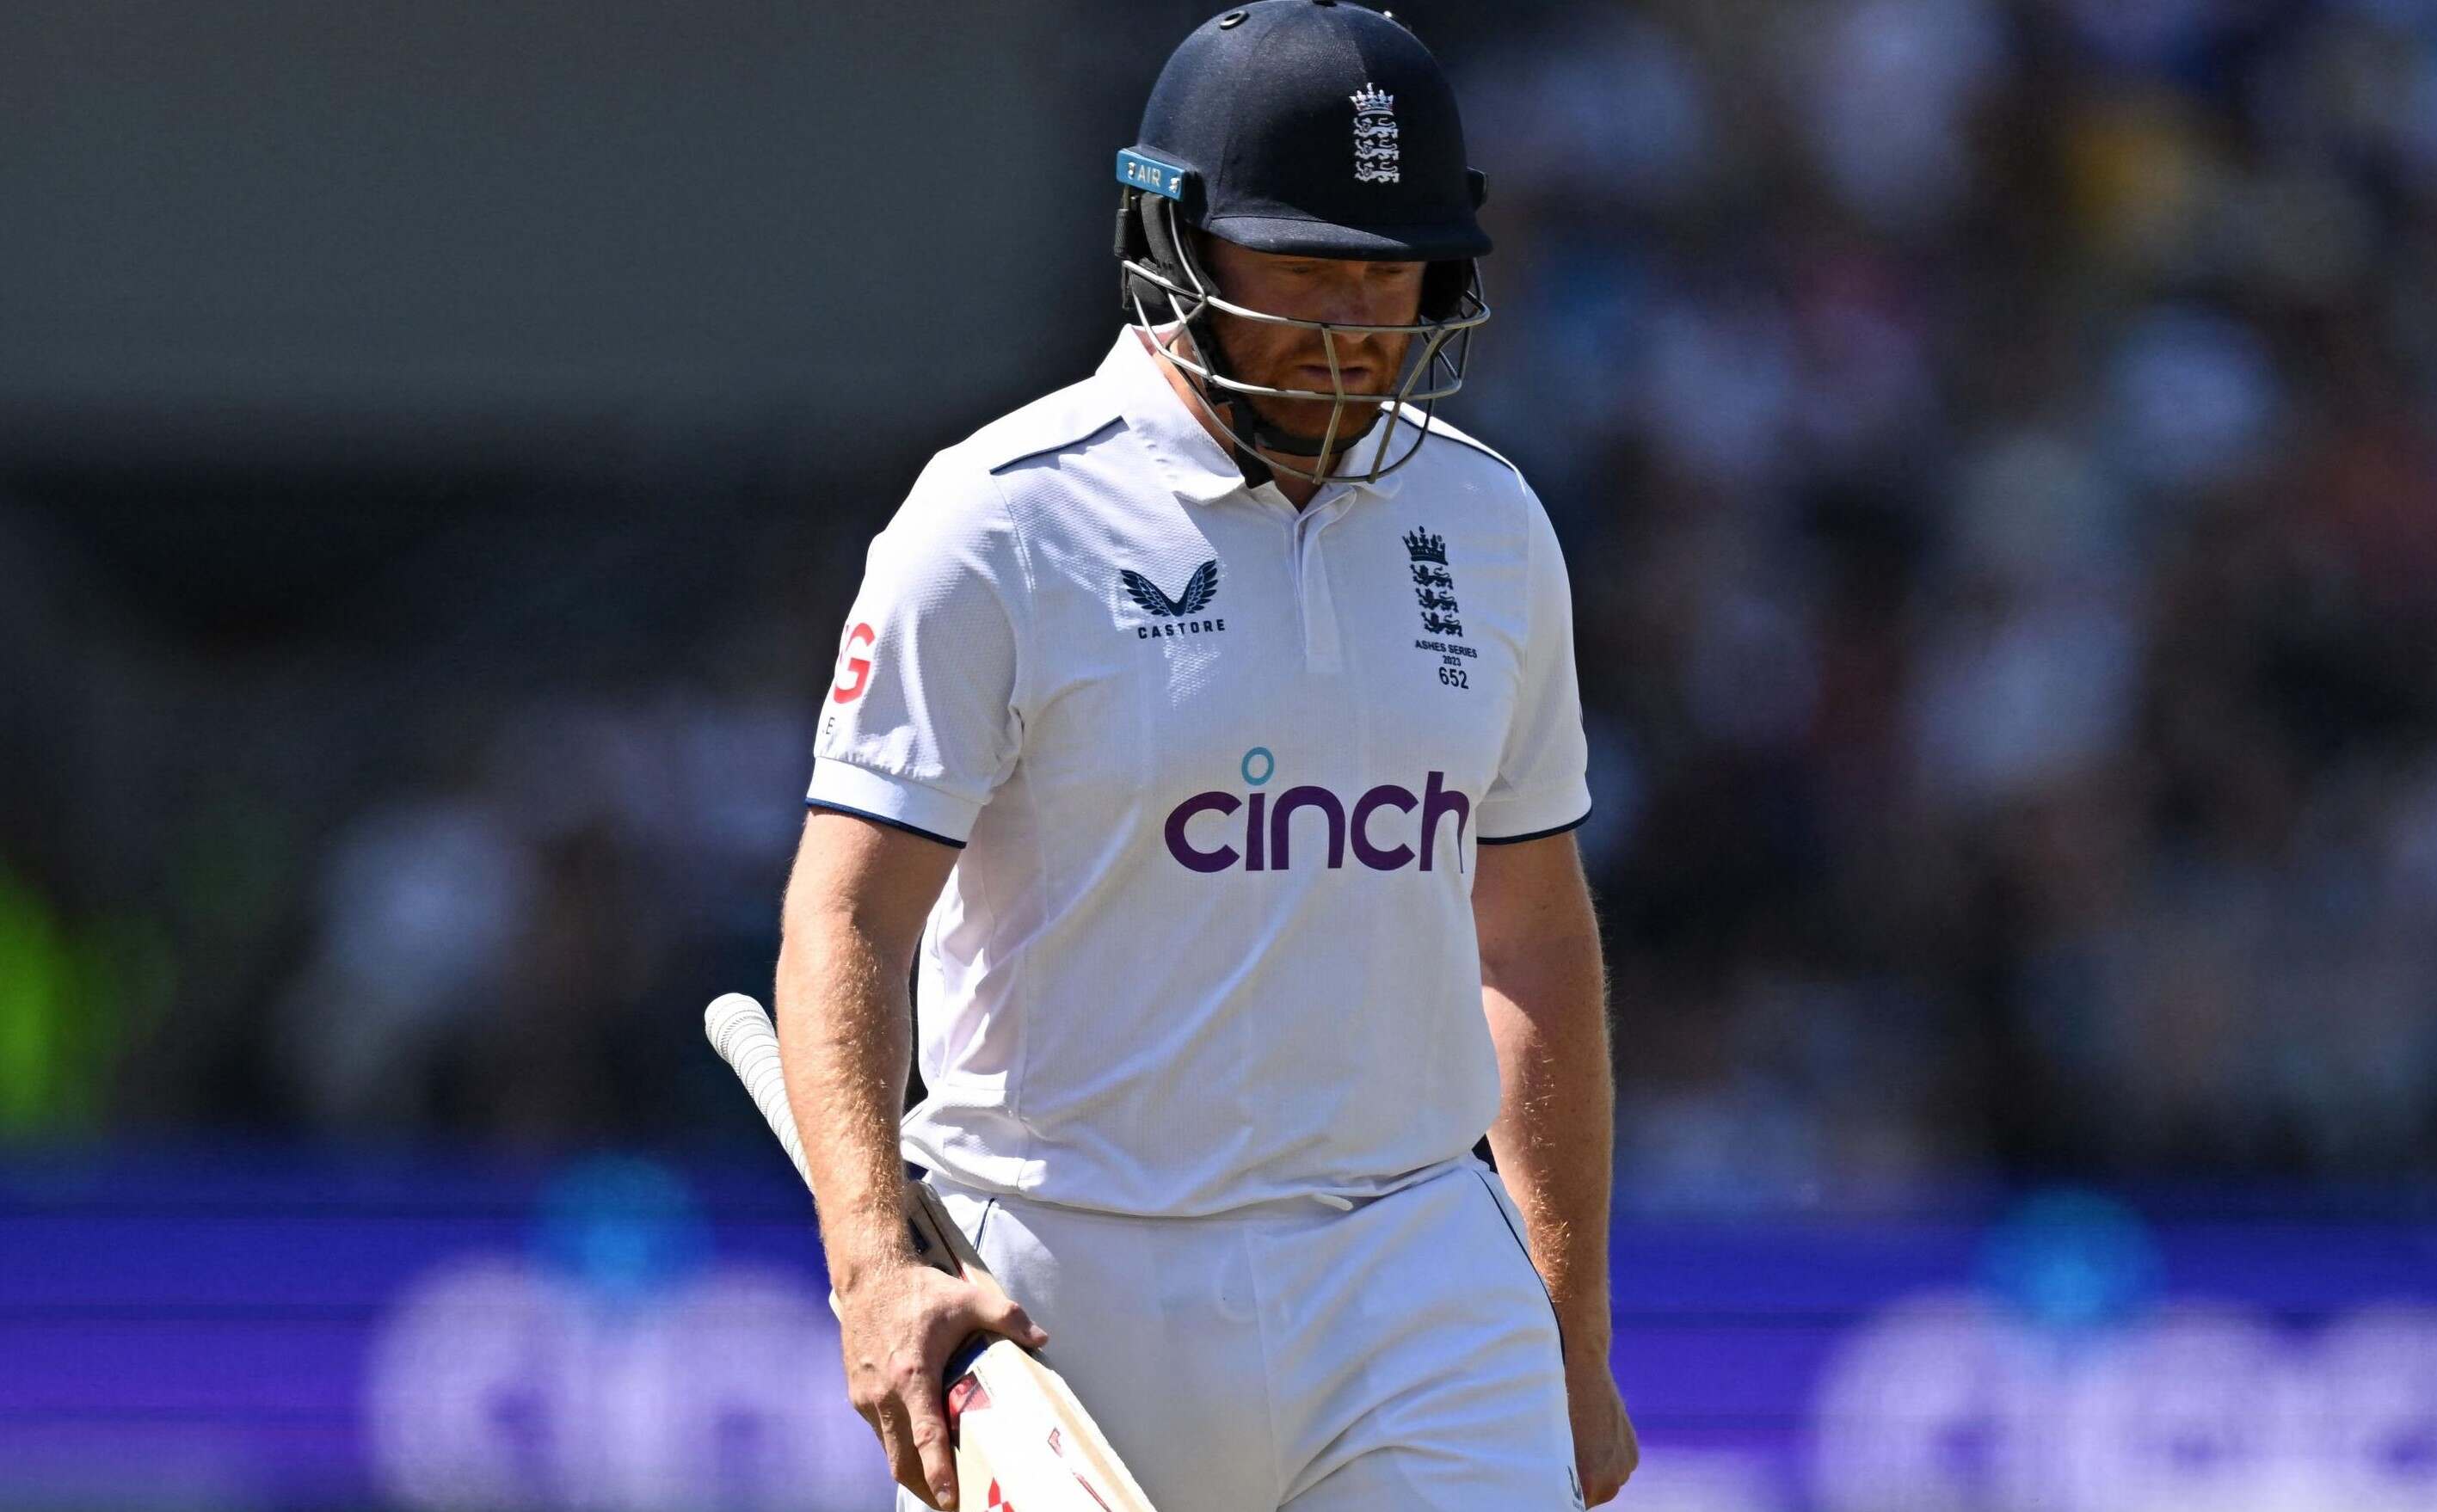 Jonny Bairstow struggles to shine in current Test series against India[Image: x.com]